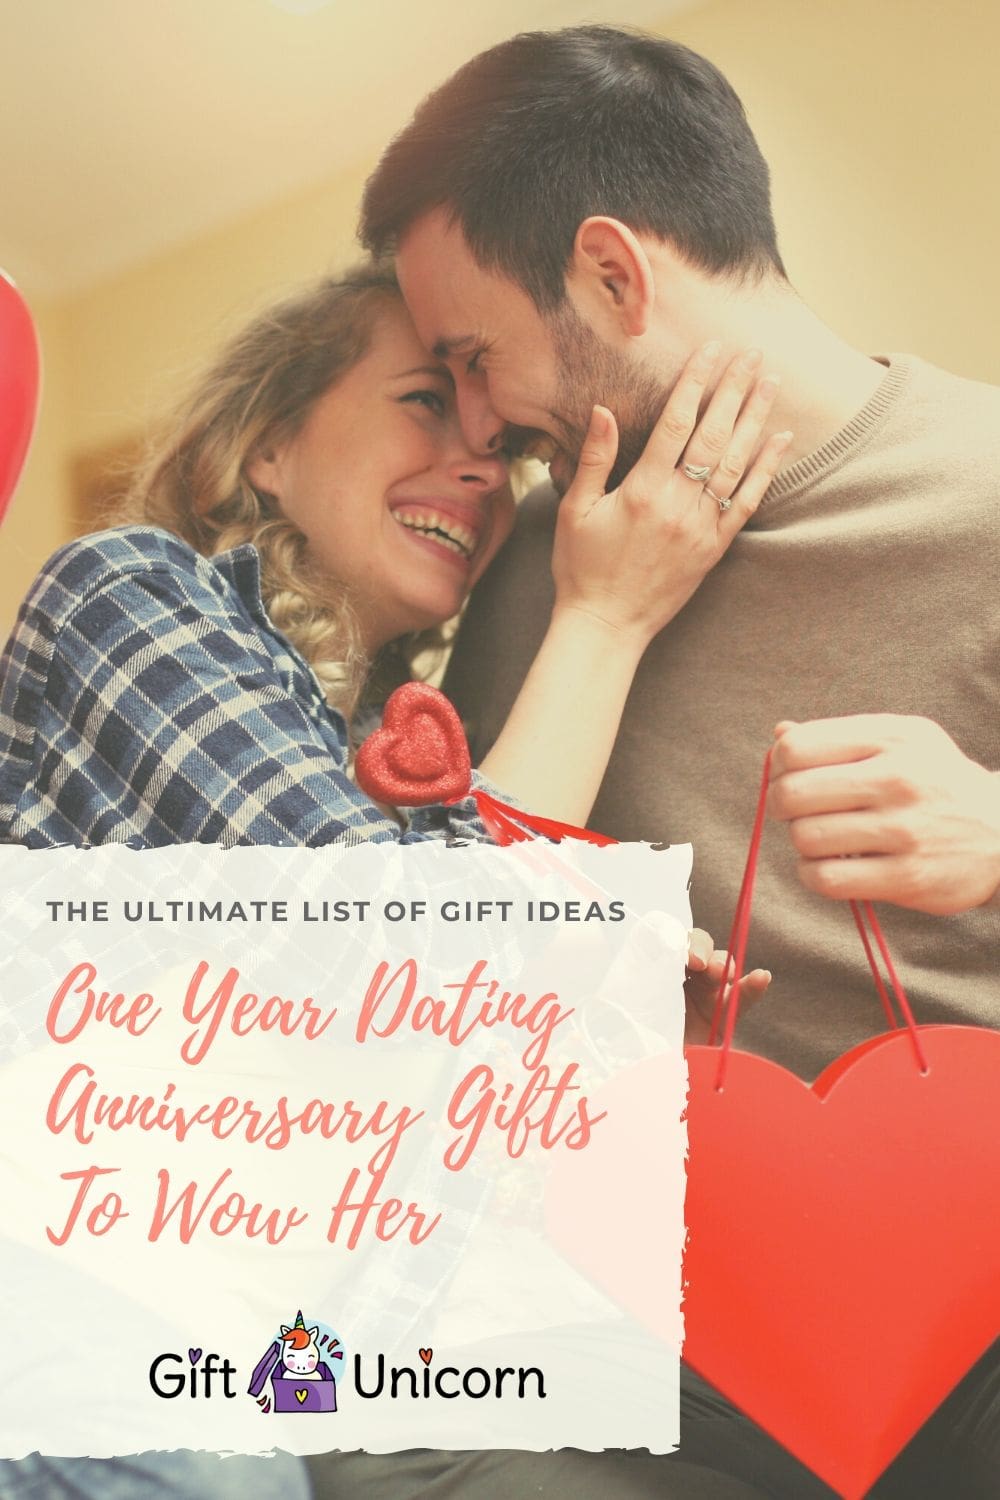 34 One-Year Dating Anniversary Gifts To Wow Her - pinterest pin image